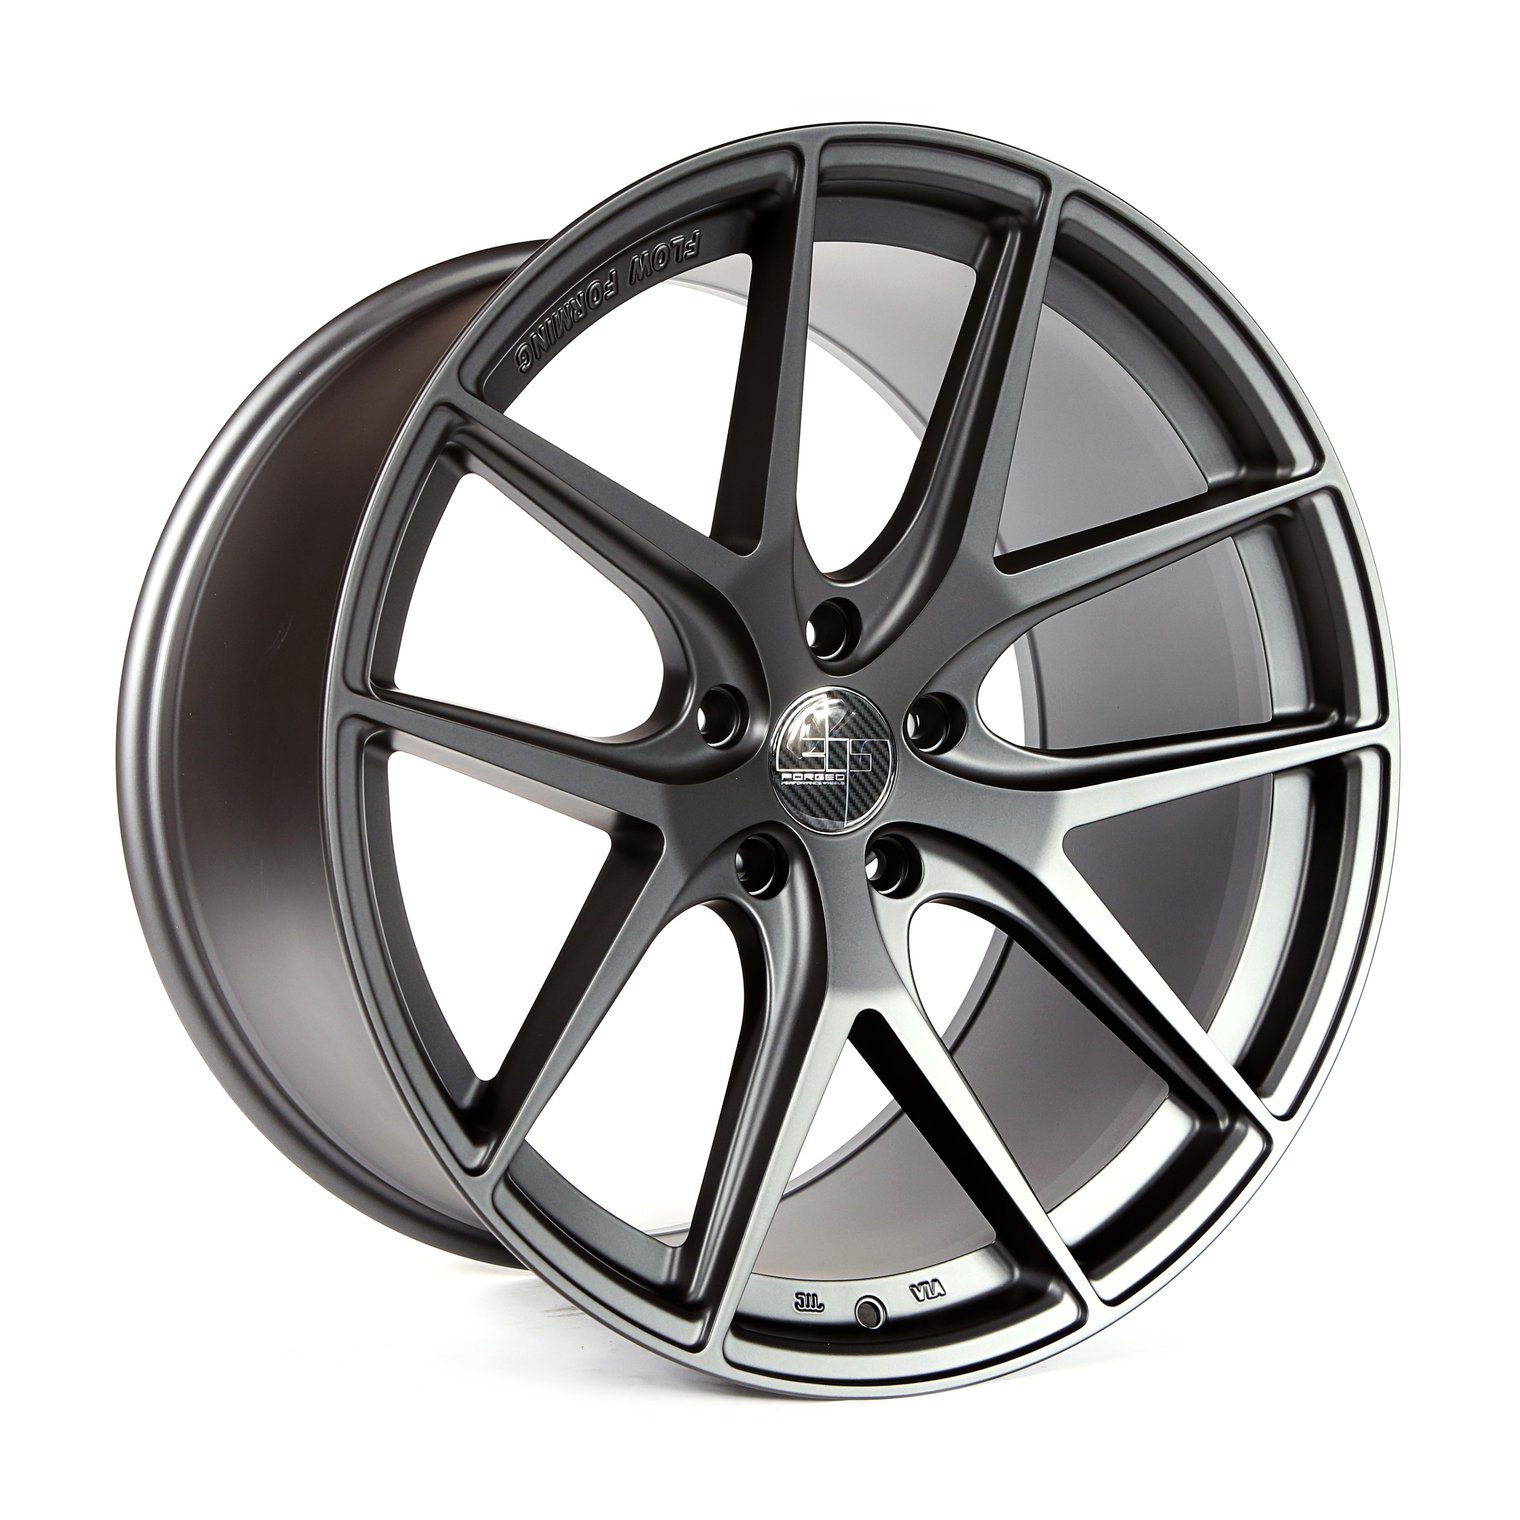 305 Forged FT101 forged wheels